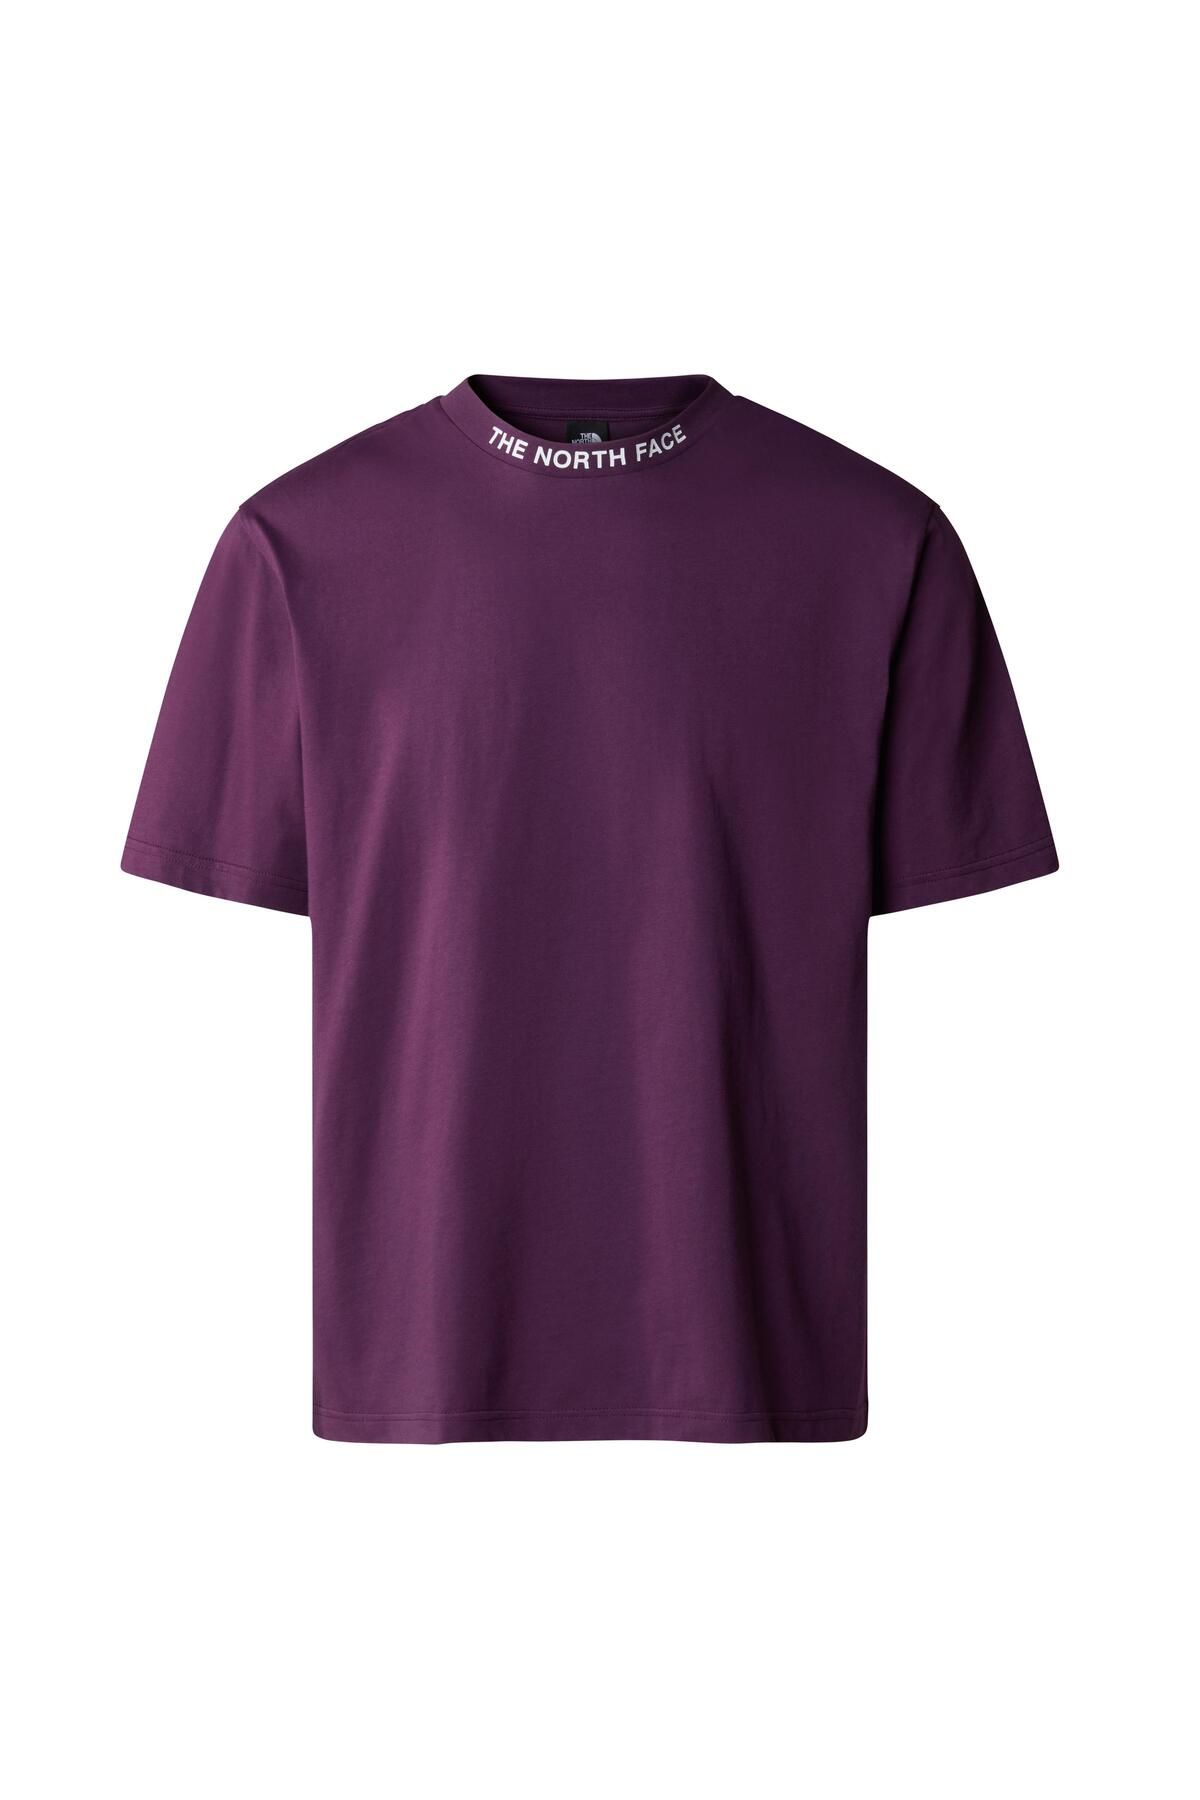 The North Face M S/S ZUMU RELAXED TEE PURPLE